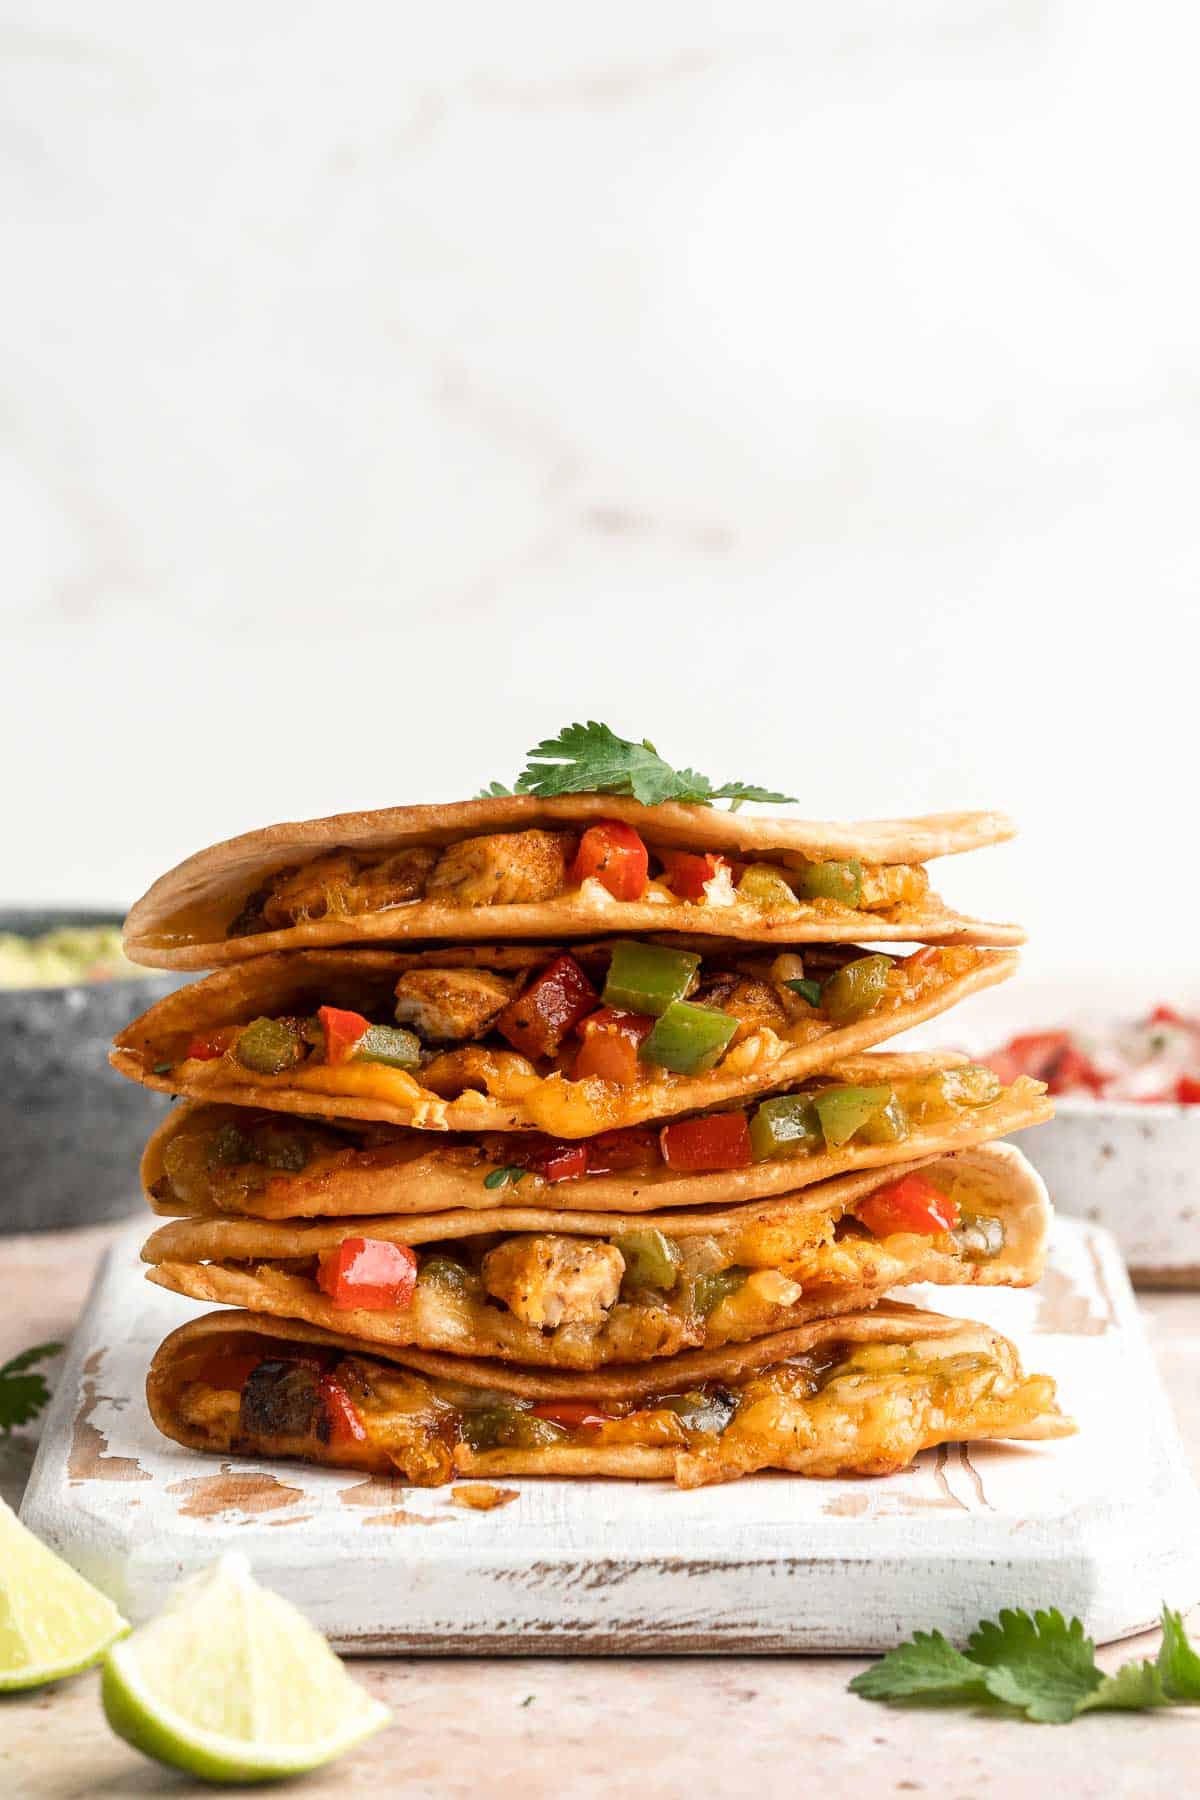 Baked Chicken Quesadillas are cheesy, crispy, flavorful, and delicious. This family-friendly recipe is quick and easy to make in just 30 minutes! | aheadofthyme.com